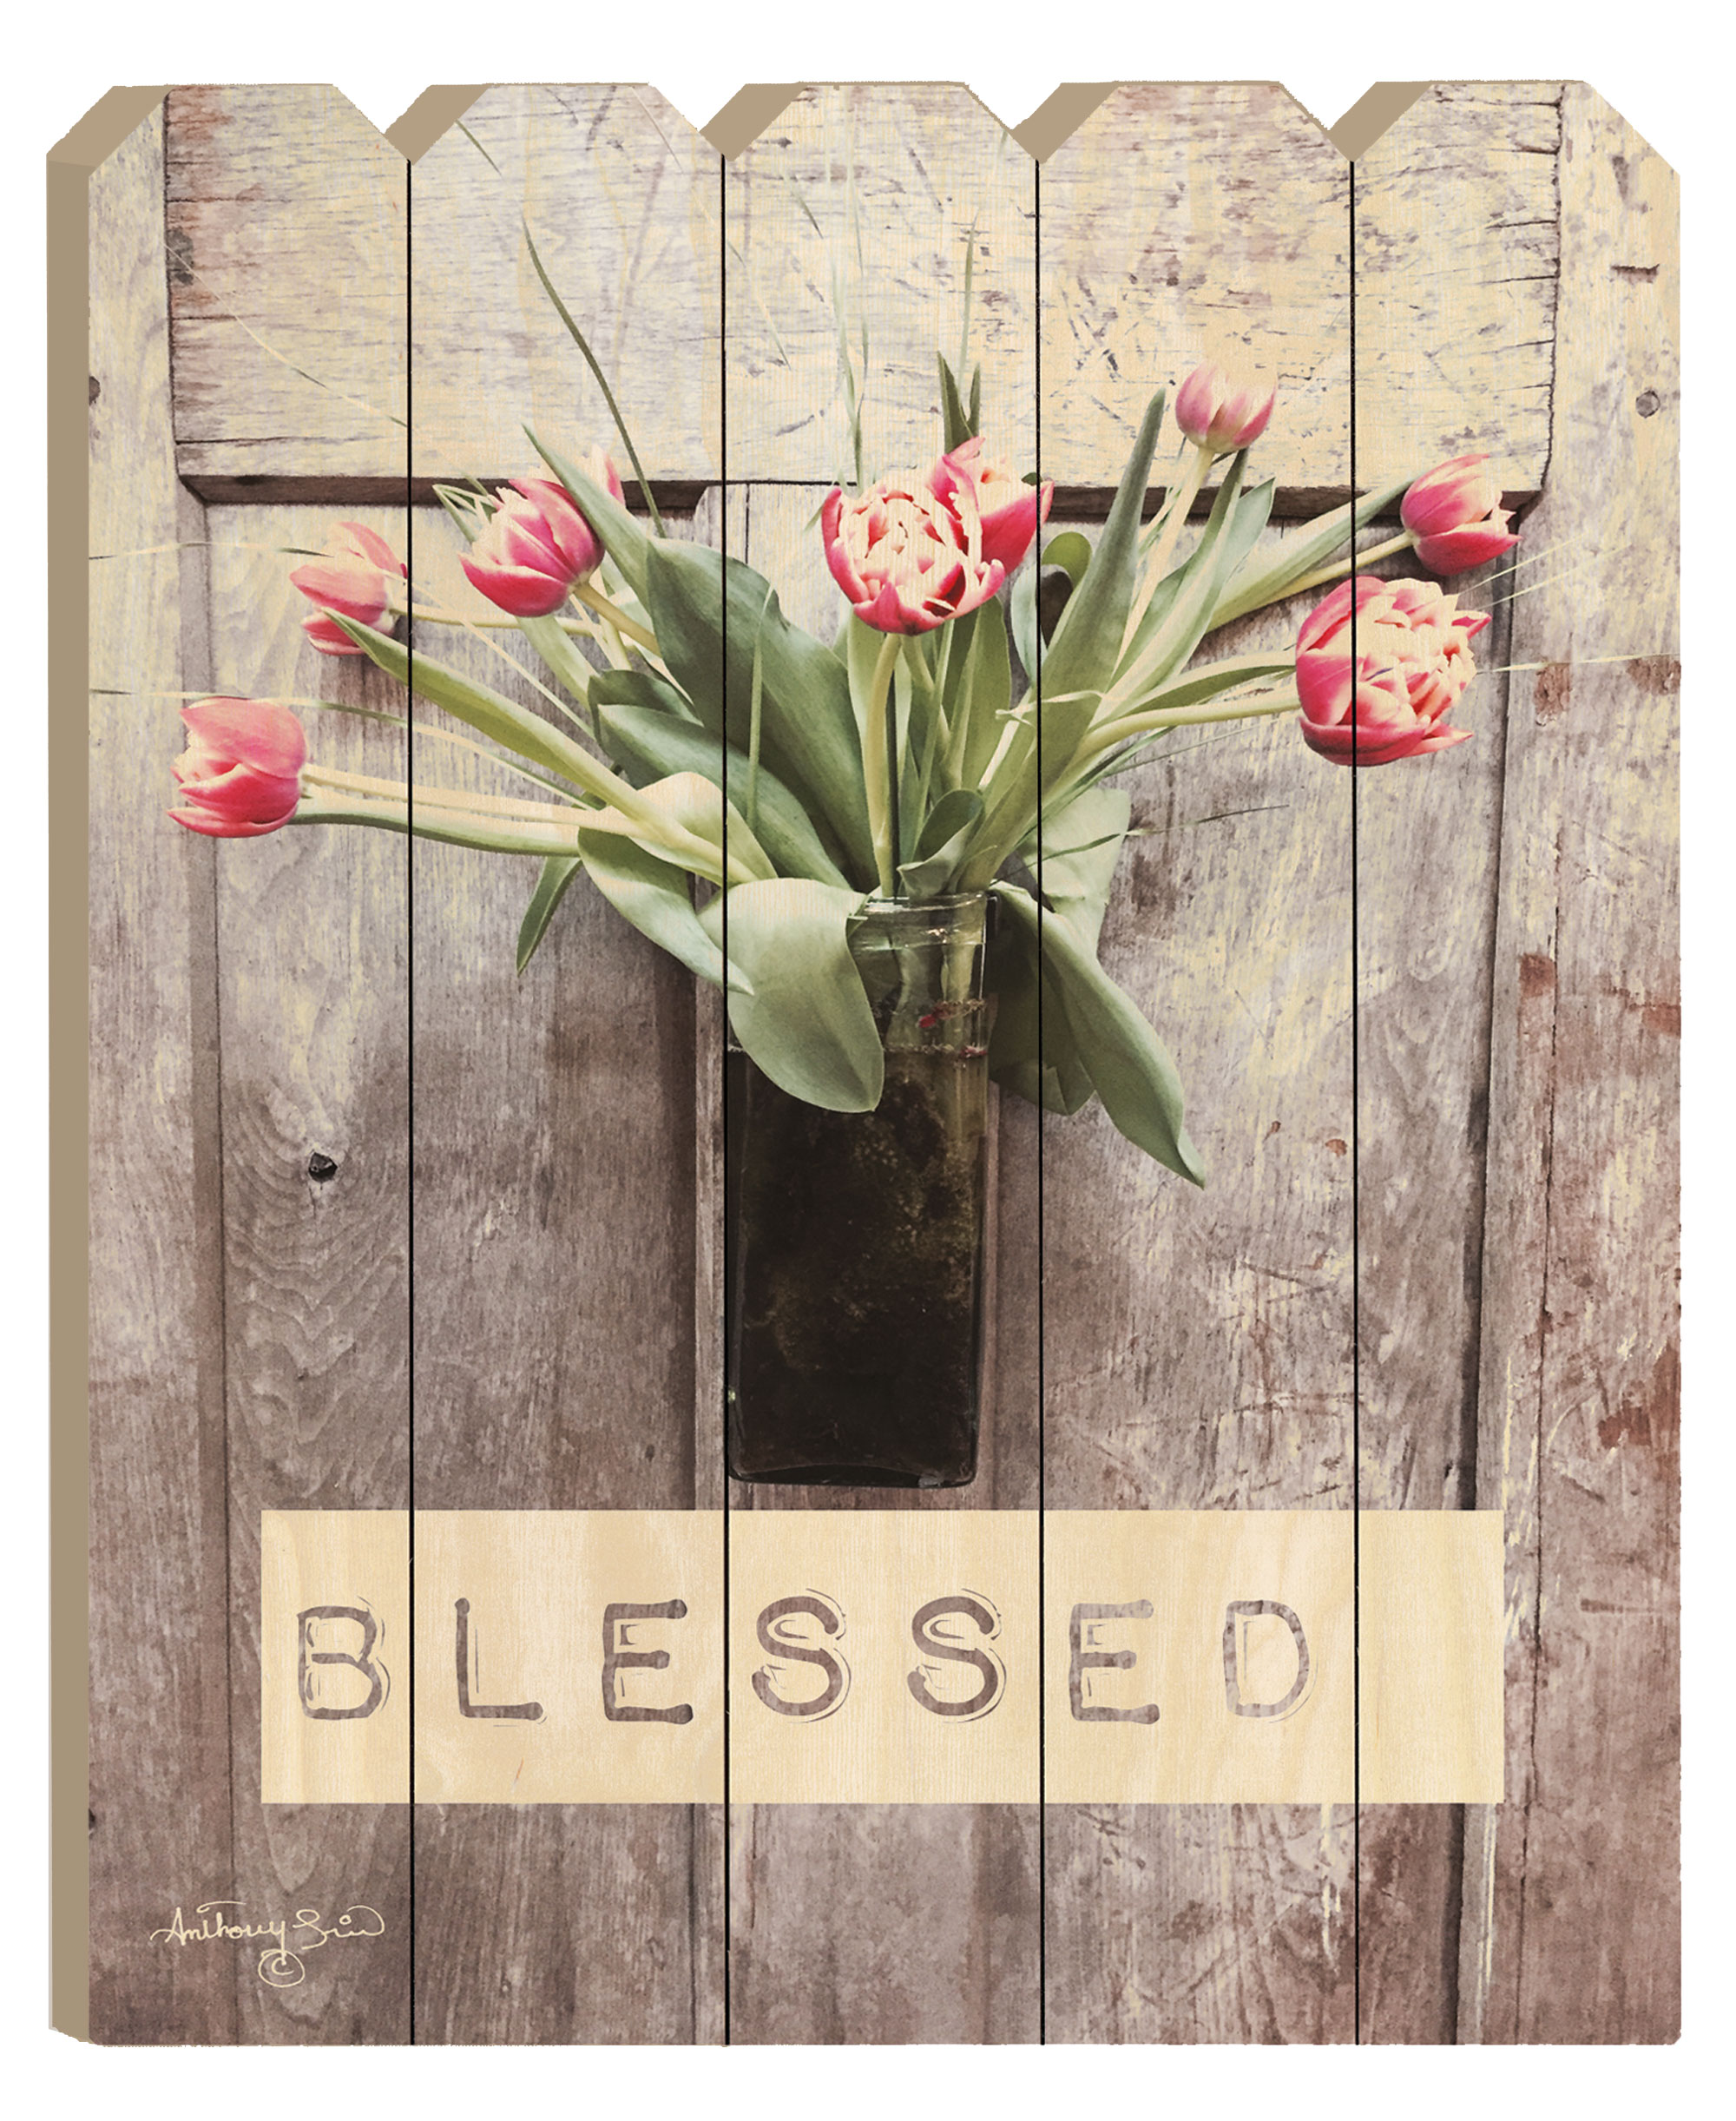 "Blessed Tulips" By Artisan Anthony Smith, Printed on Wooden Picket Fence Wall Art